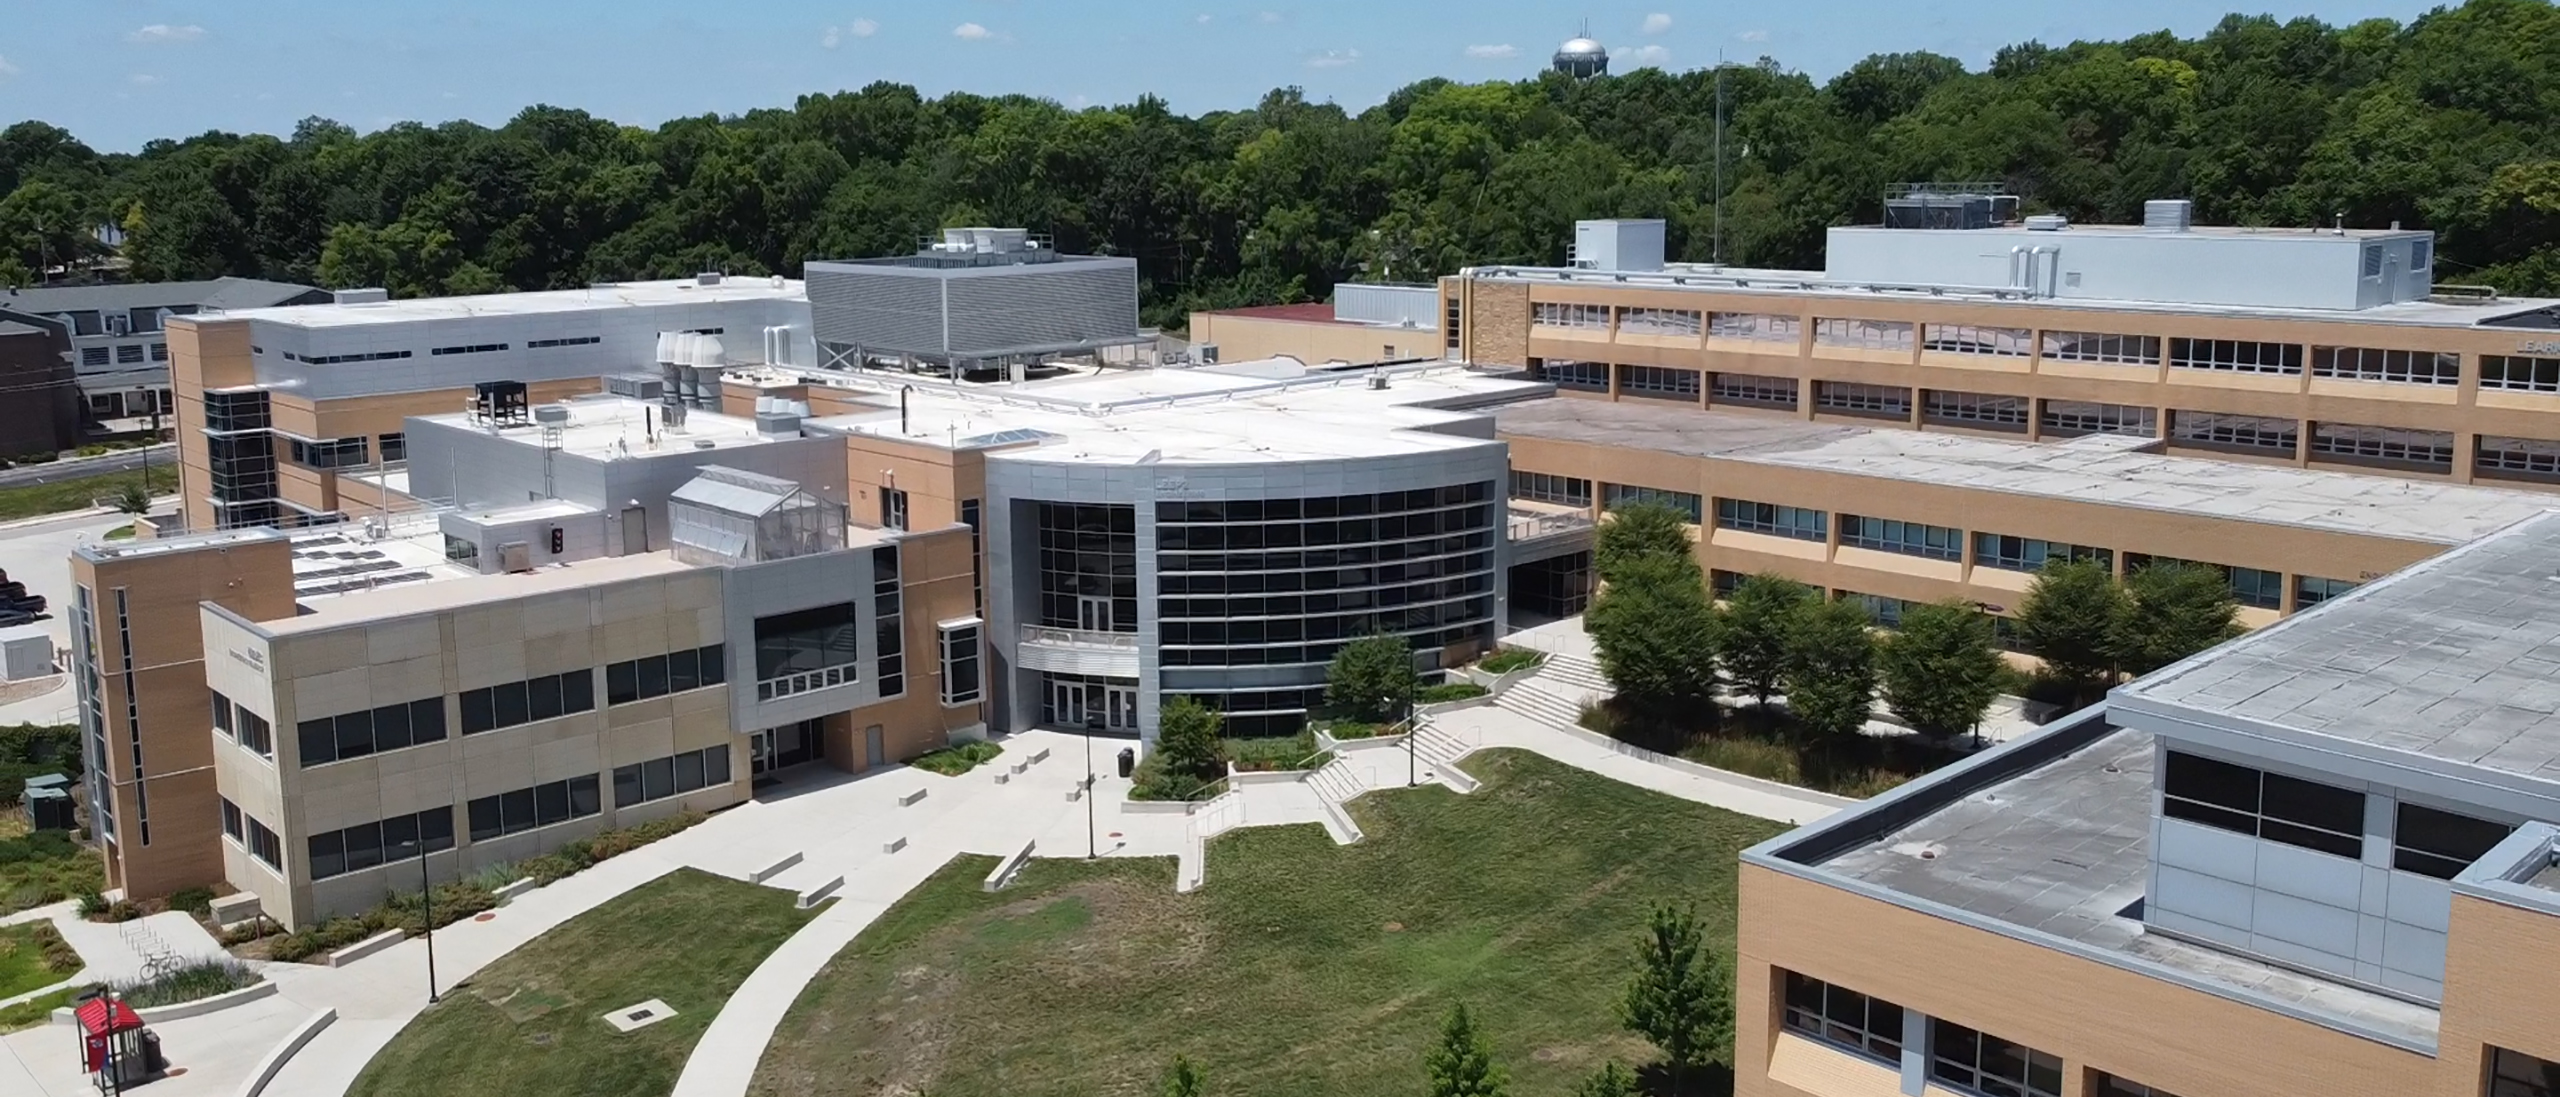 An aerial view of the engineering complex